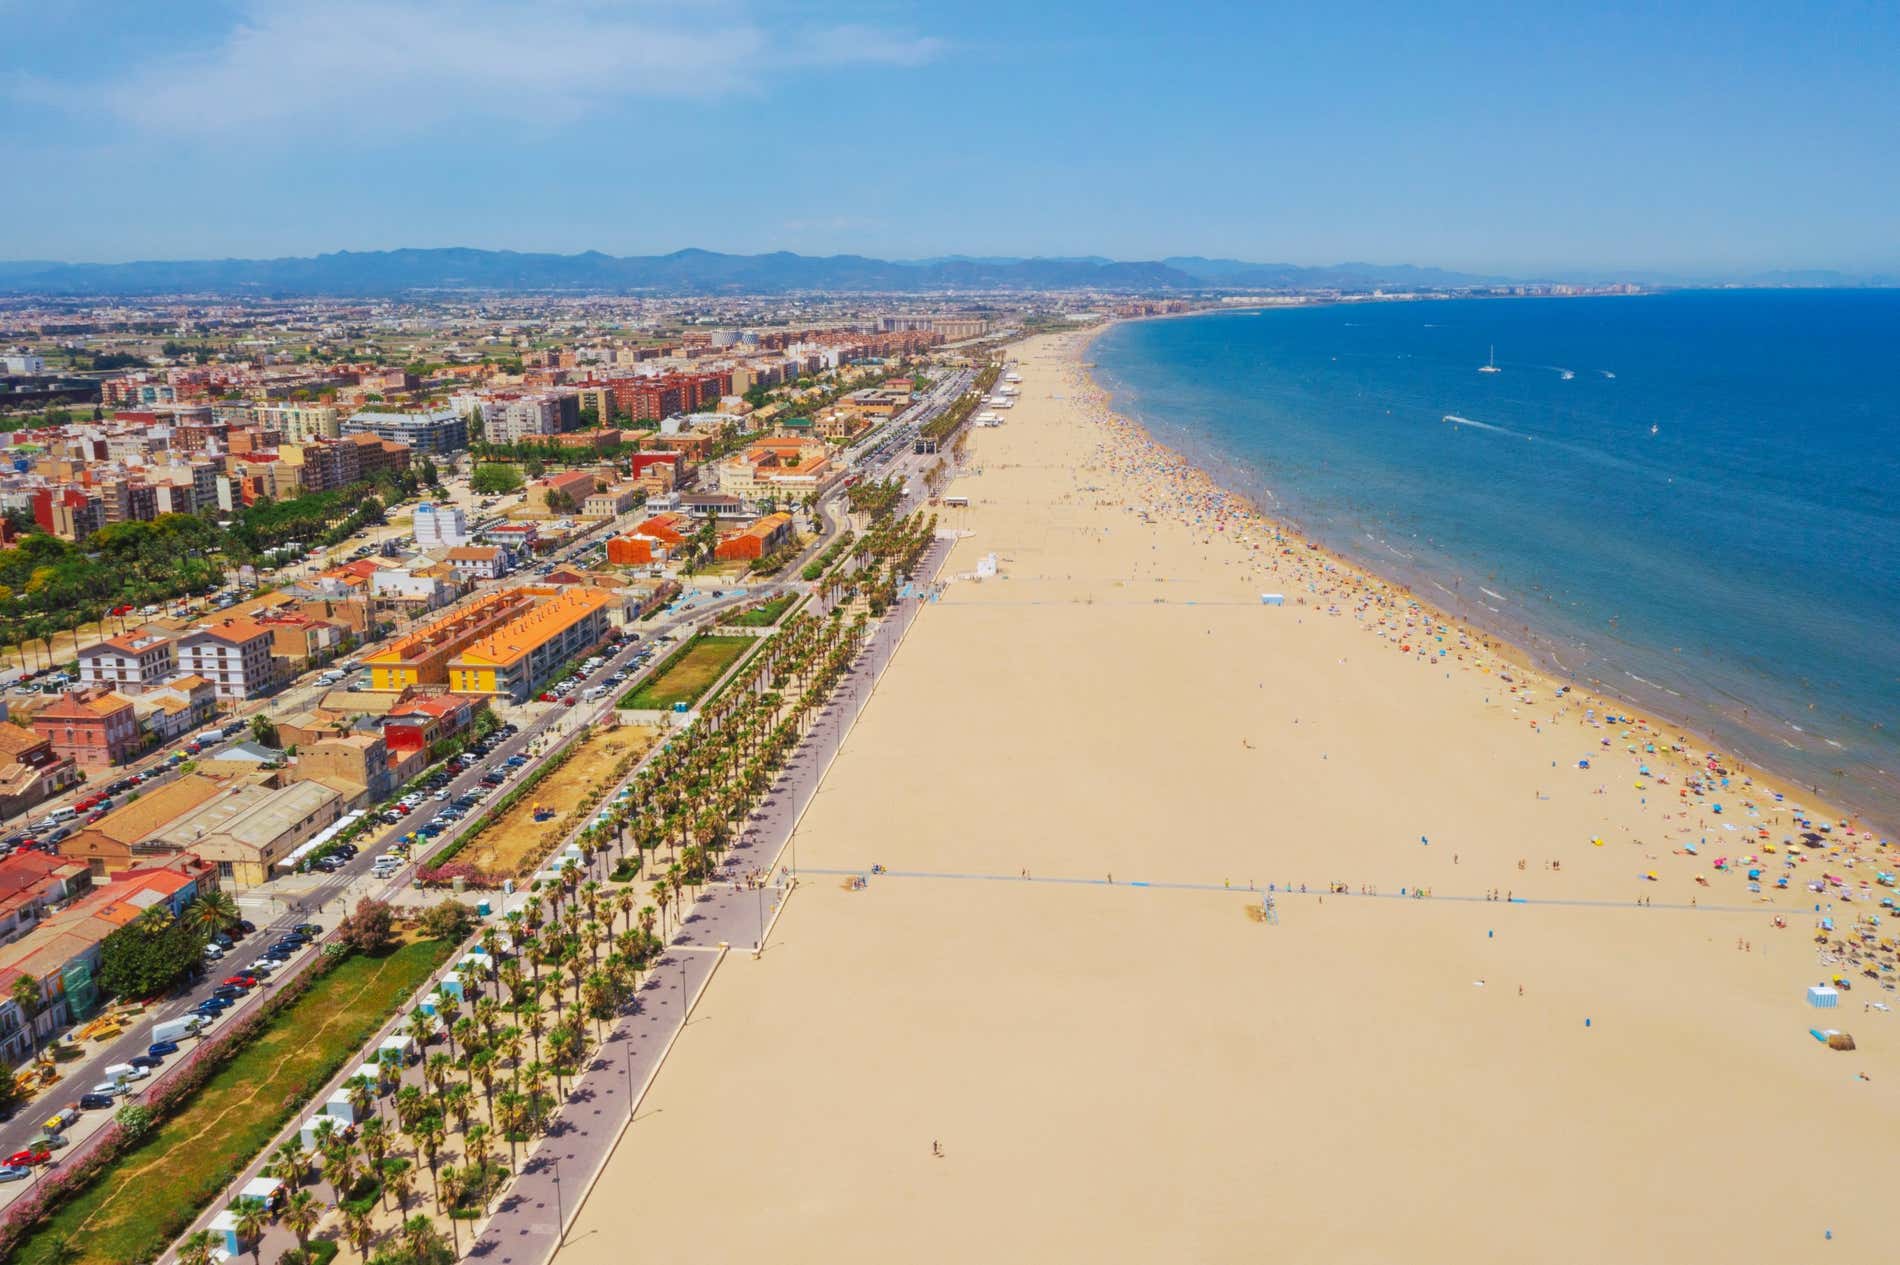 Aerial view over the long sandy Malvarrosa Beach, blue sea and nearby colourful houses in the Region of Valencia